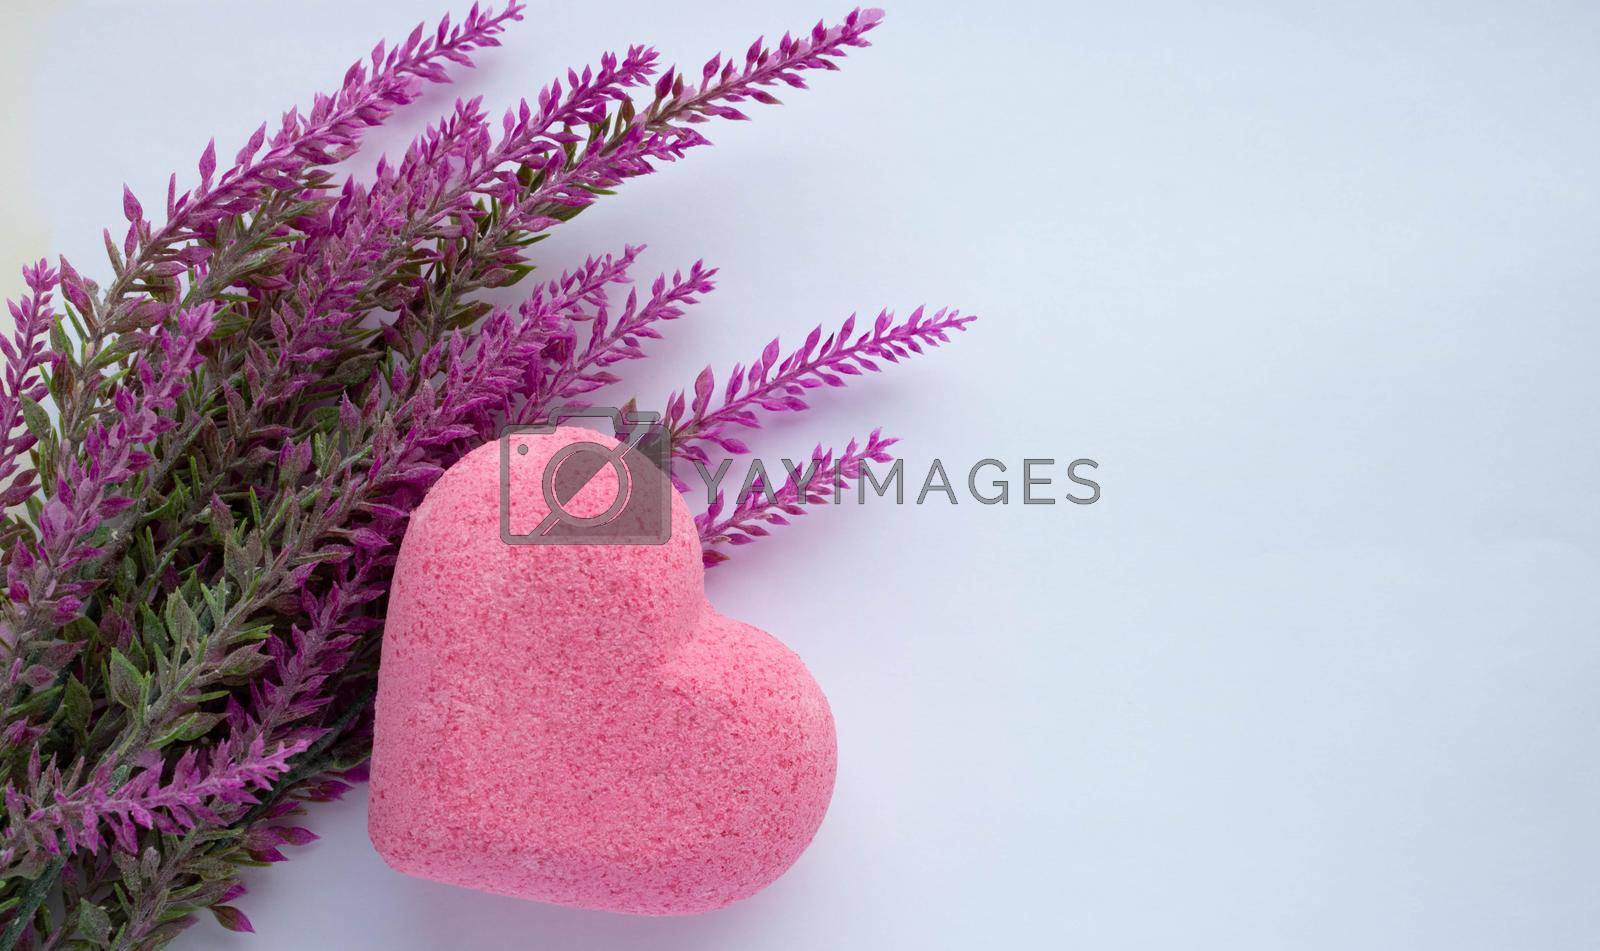 Royalty free image of Purple heart bath salt and a branch of artificial lavender on a white background. Space for text by lapushka62